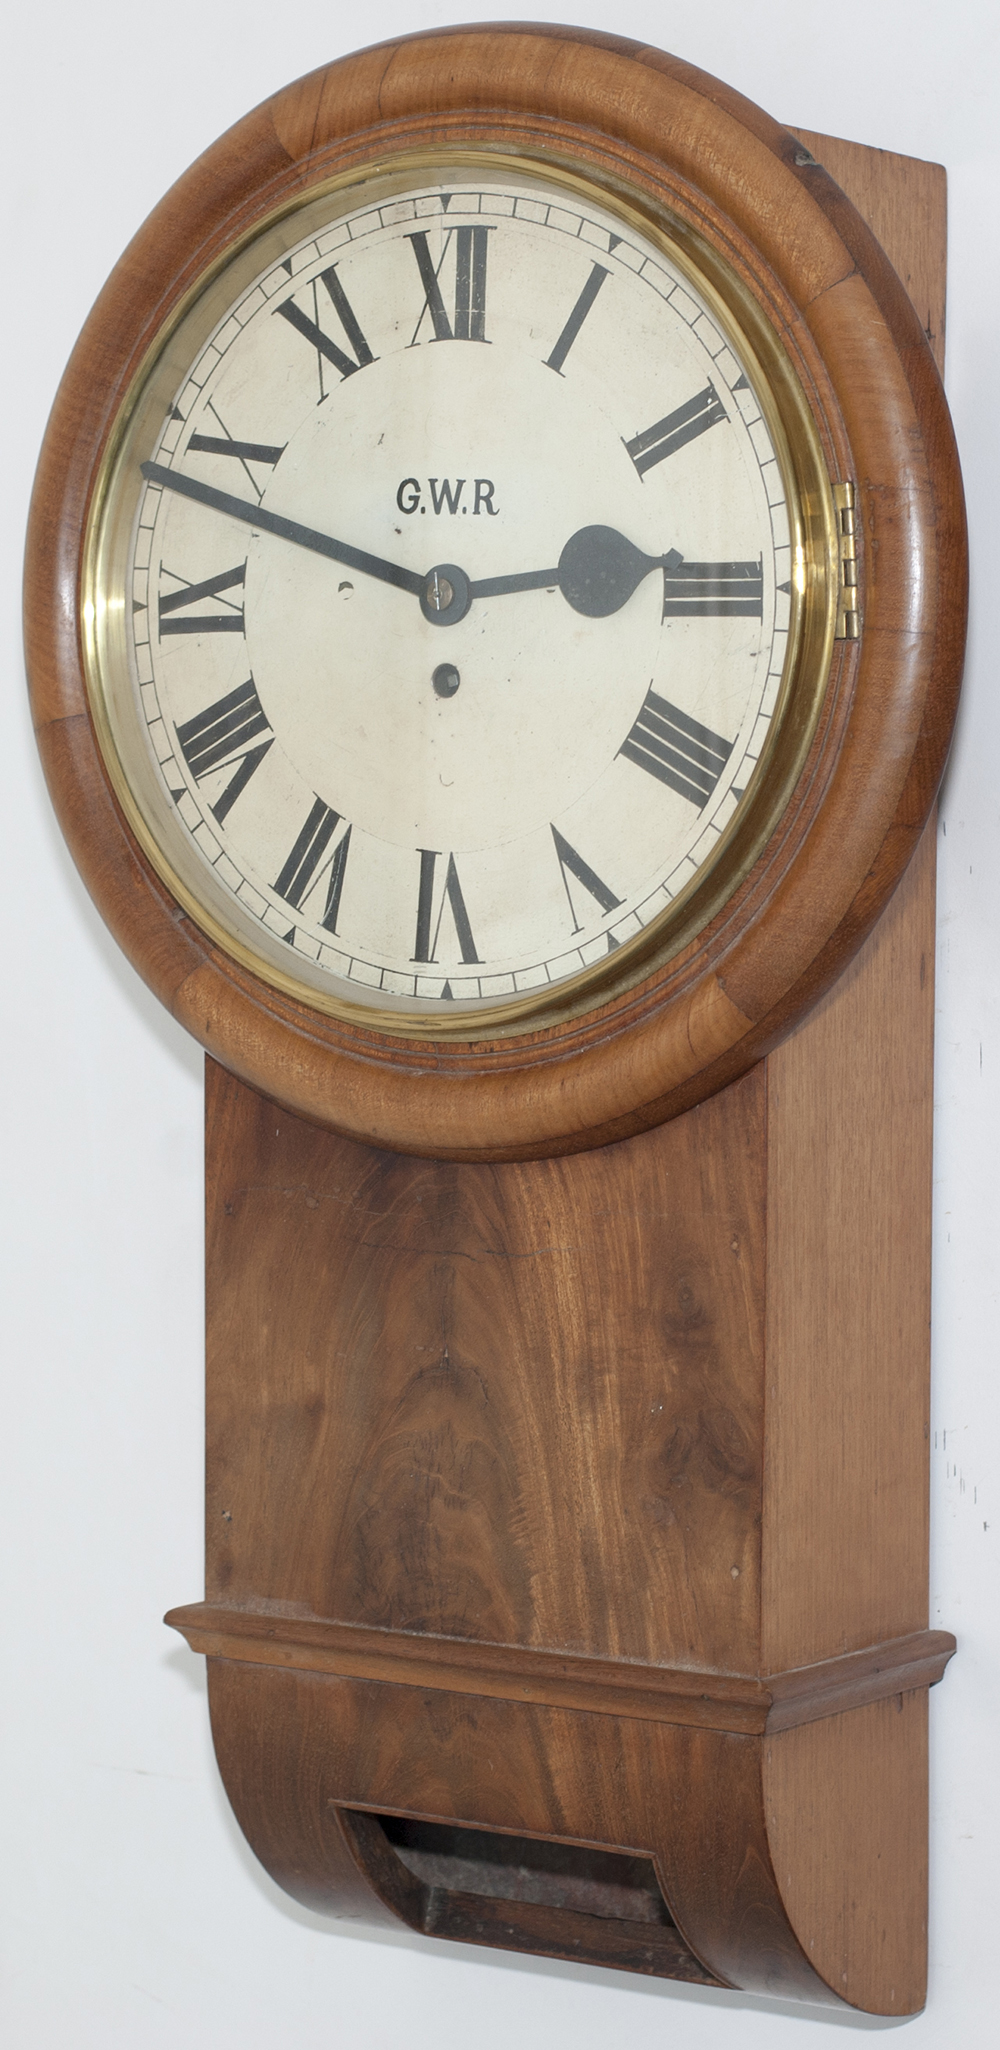 GWR 12 inch Trunk clock in semi restored condition but missing bottom and side door. Movement